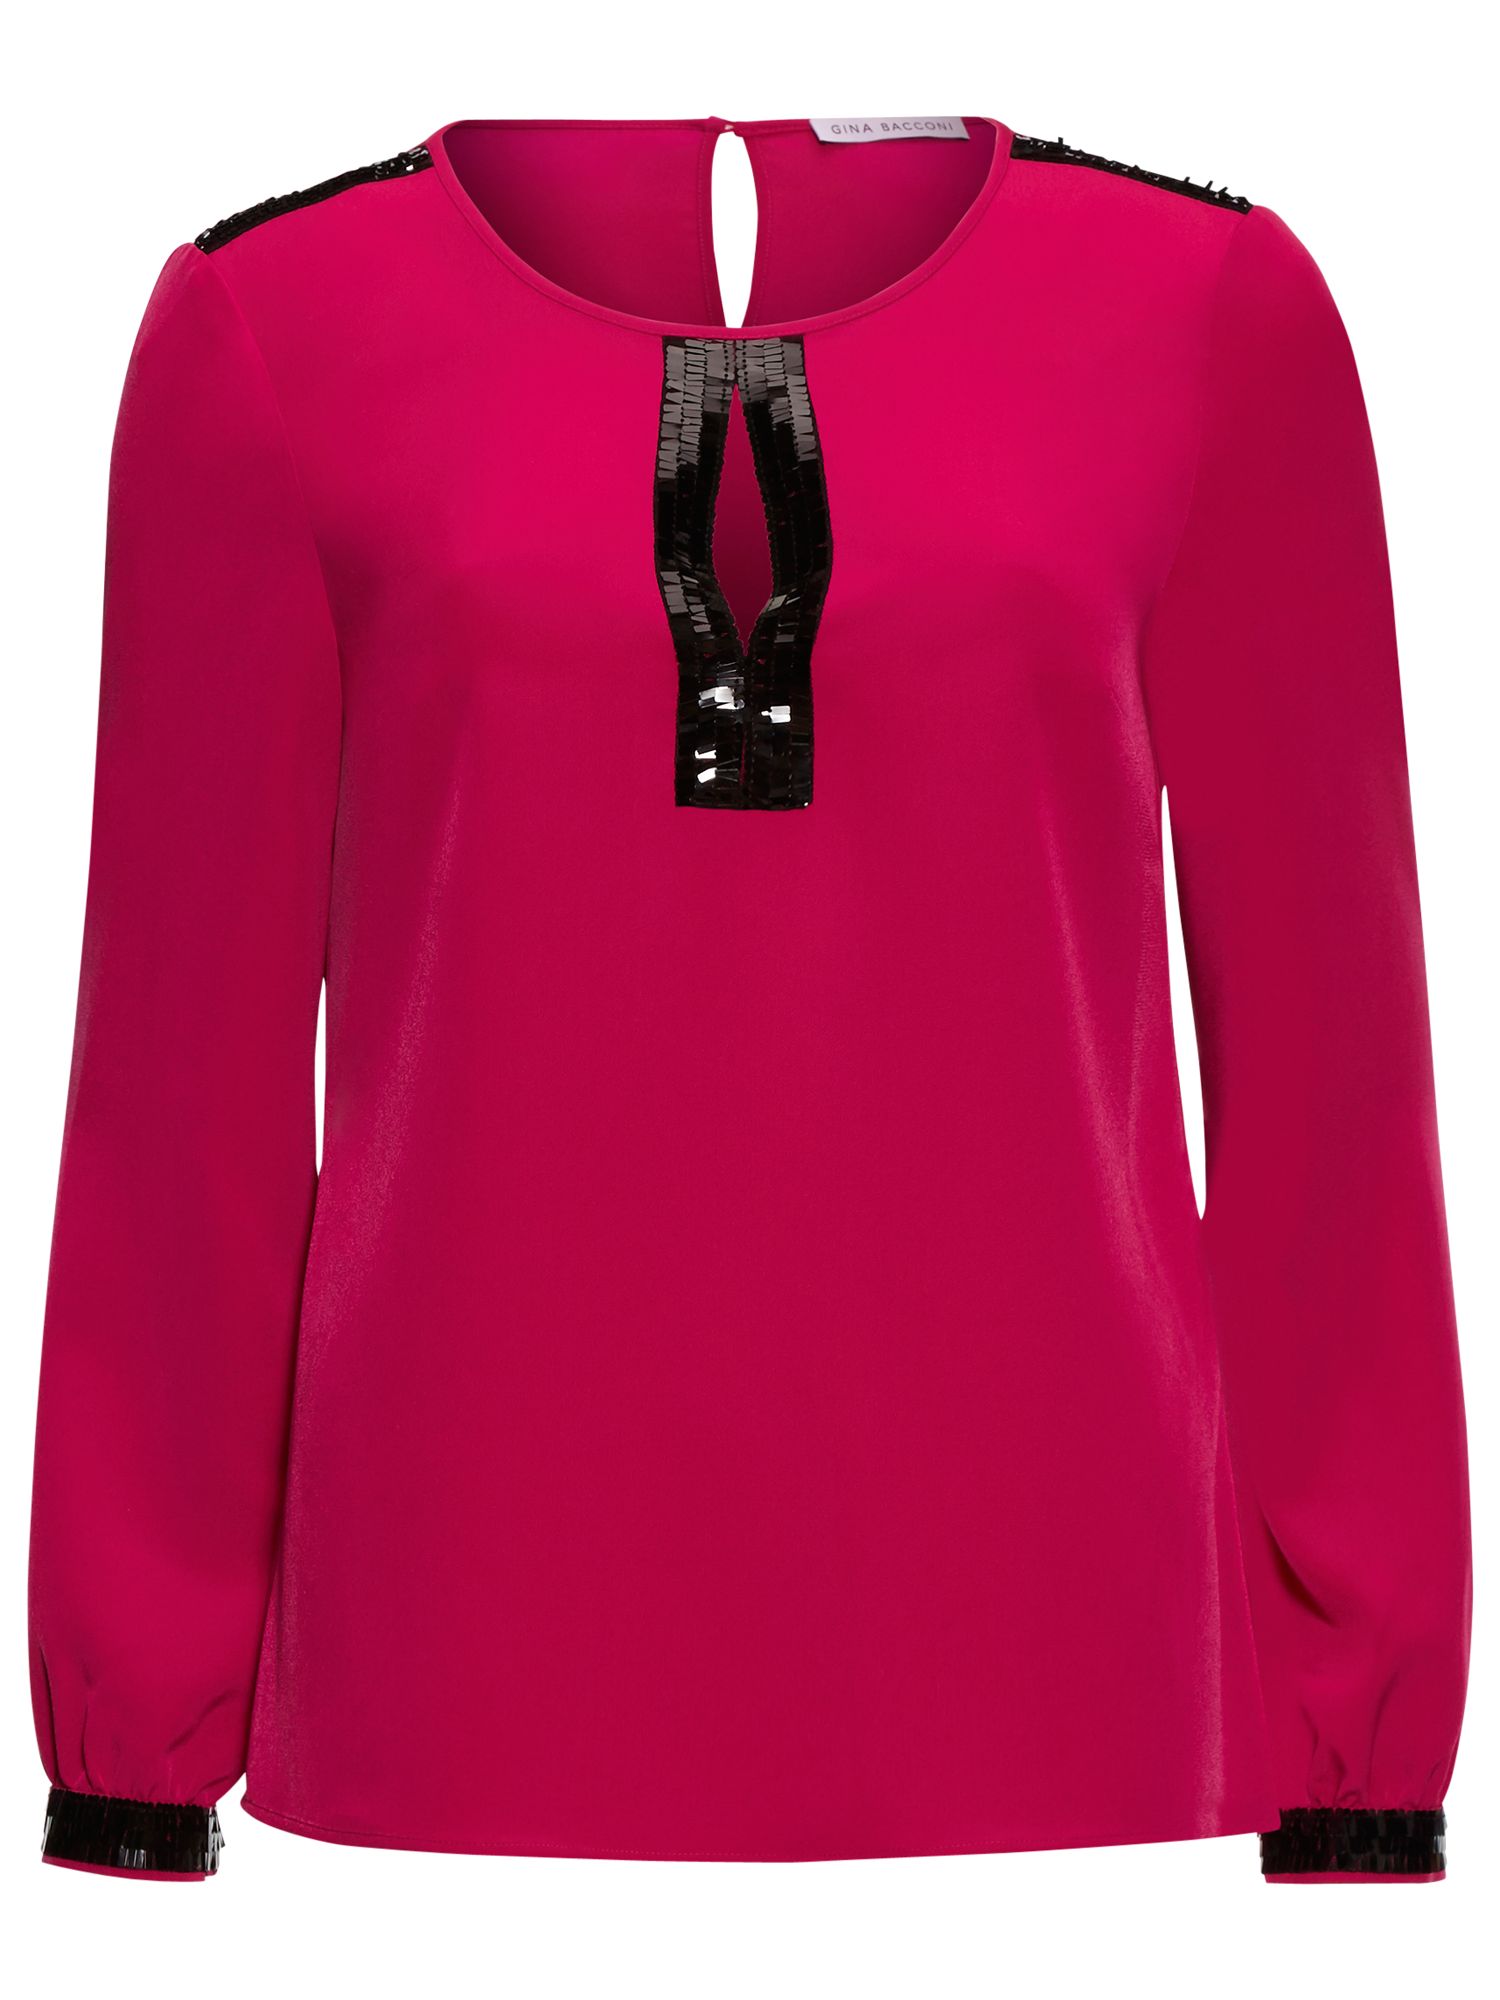 Gina Bacconi Soho Crepe Blouse With Sequin Trim